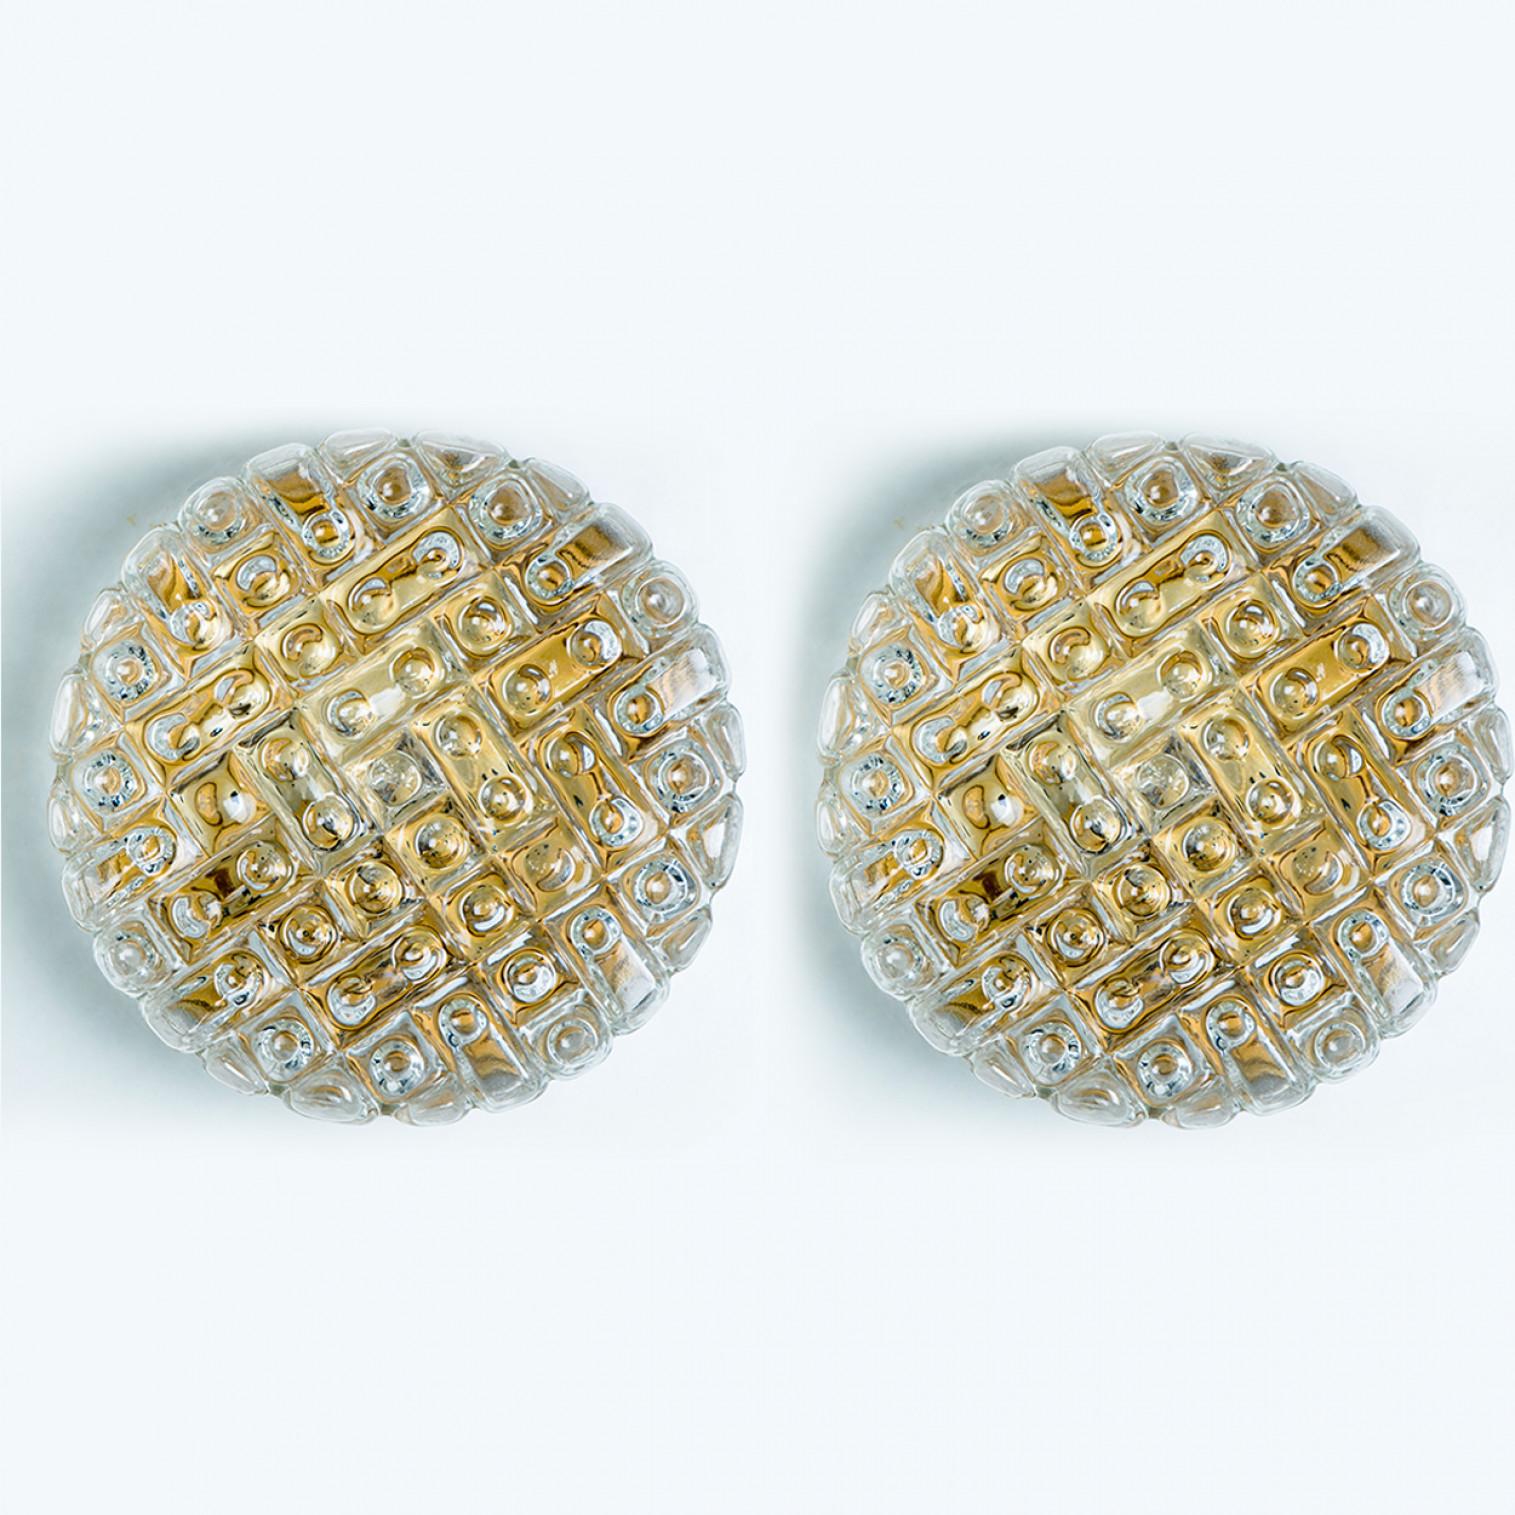 A pair of Clear colored bubble glass wall lights designed in the style of Helena Tynell around 1960-1970 in Europe, Germany. The rich textured bubbled glass gives a wonderful glow. The round glass is mounted on a gold colored metal back plate.

Can